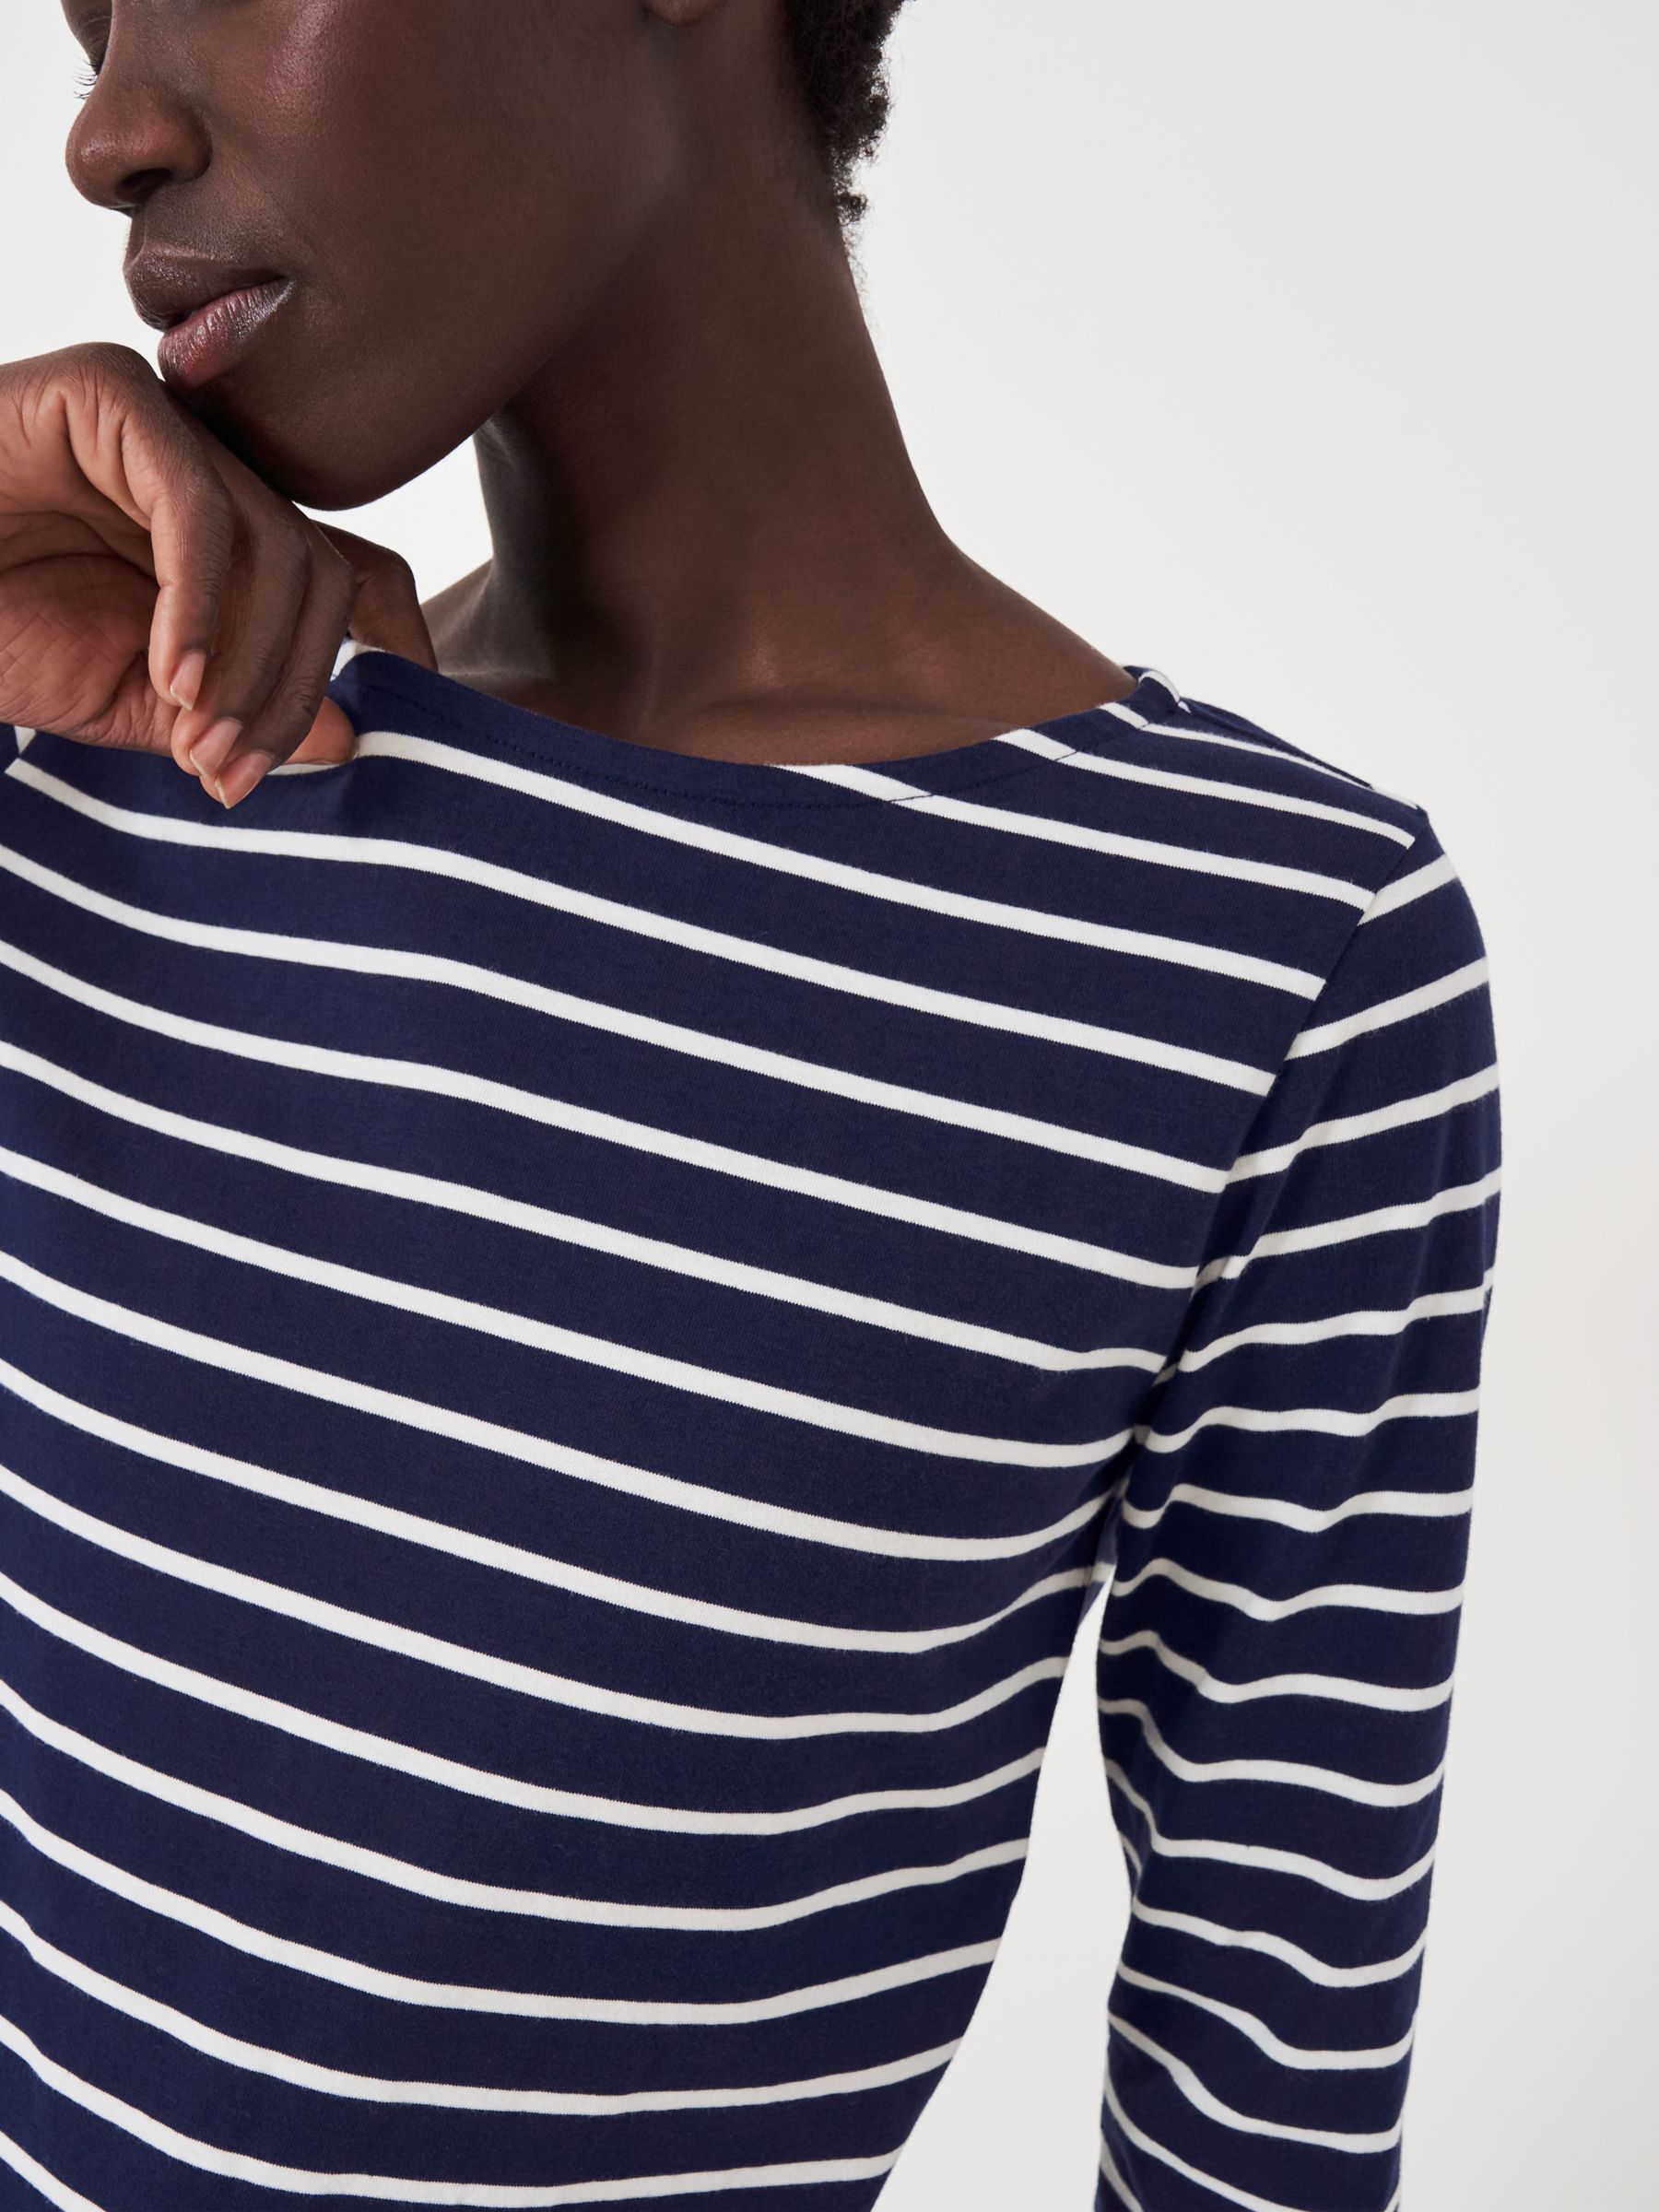 Women's Navy Stripe Essential Cotton Breton from Crew Clothing Company